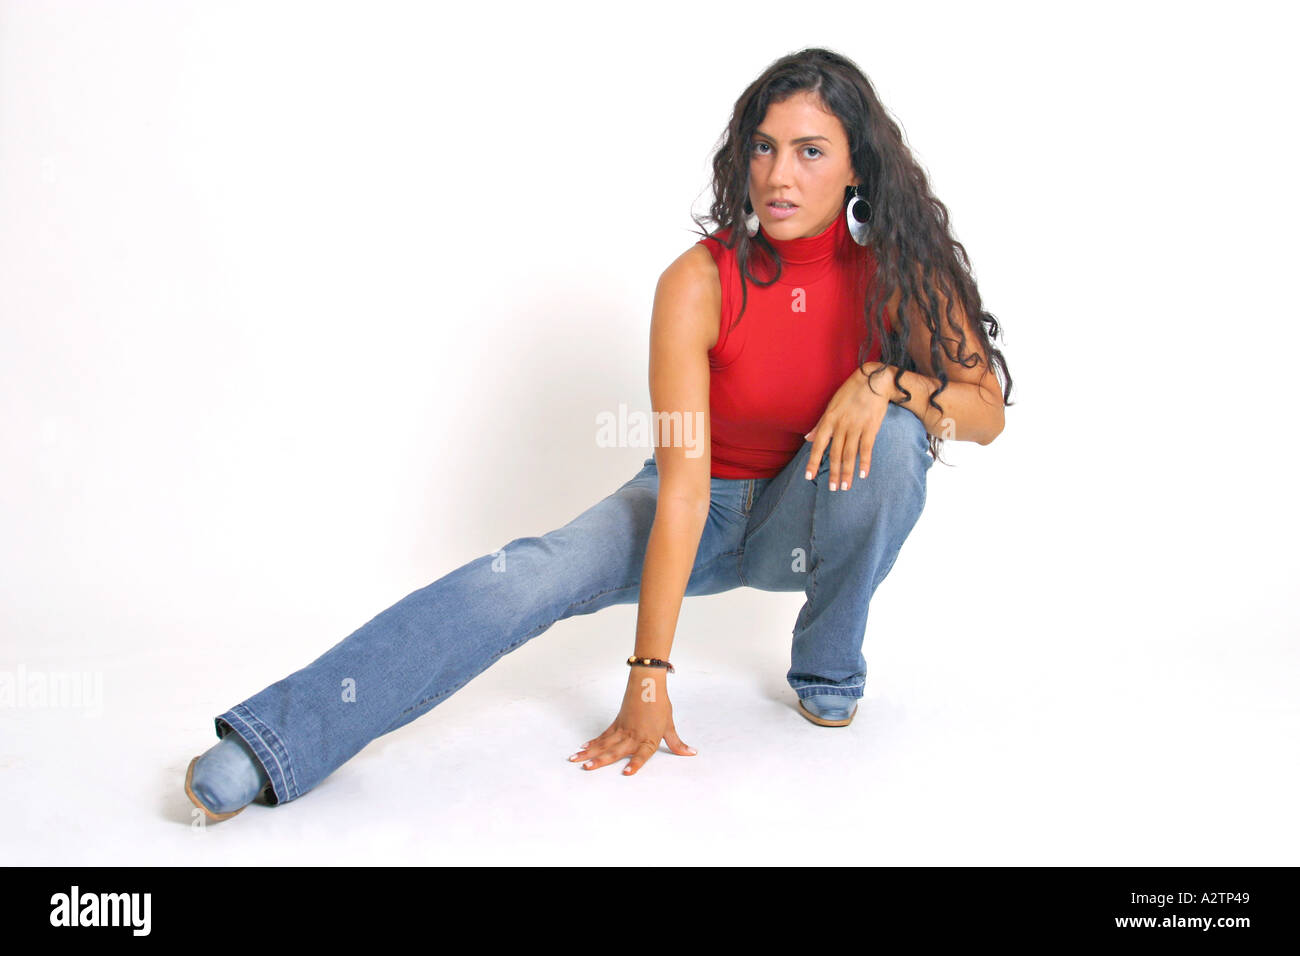 Full shot of Spanish girl with red top and jeans squatting with extended  leg Stock Photo - Alamy